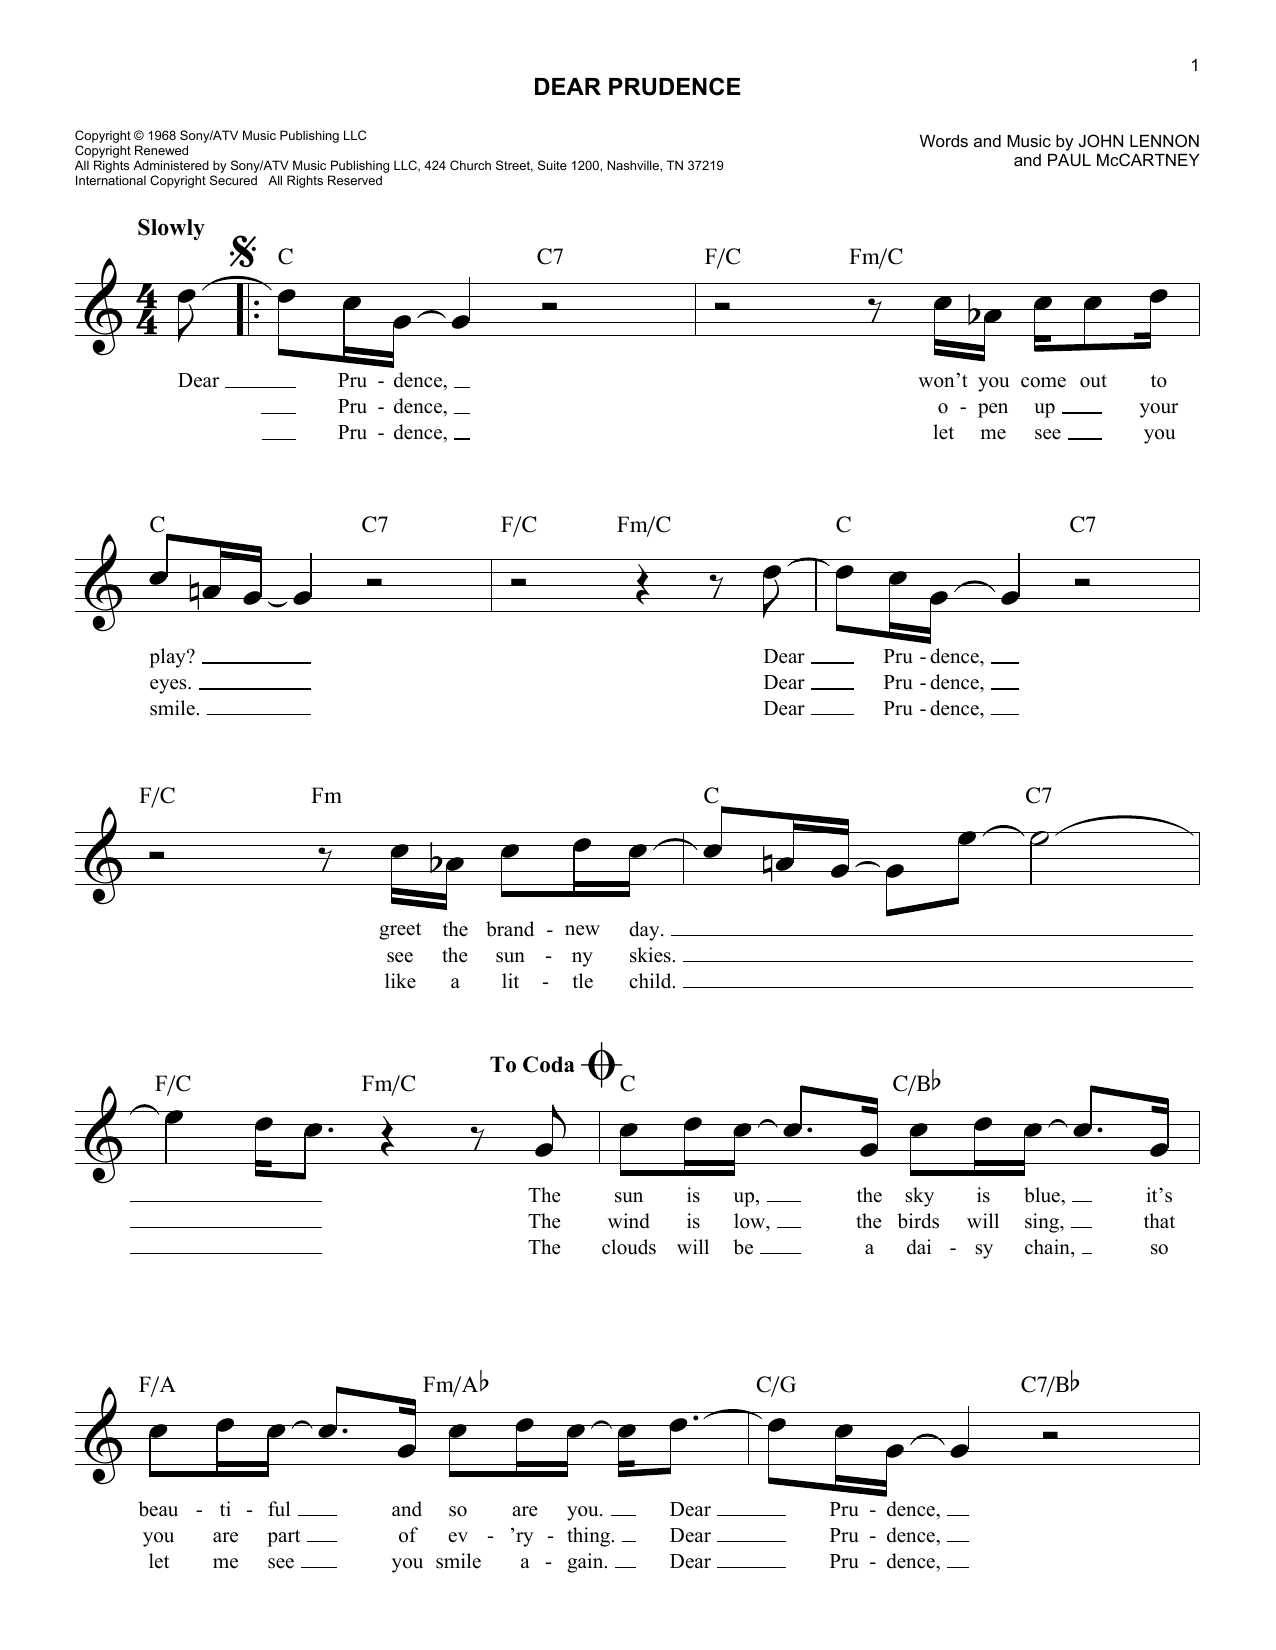 Download The Beatles Dear Prudence Sheet Music